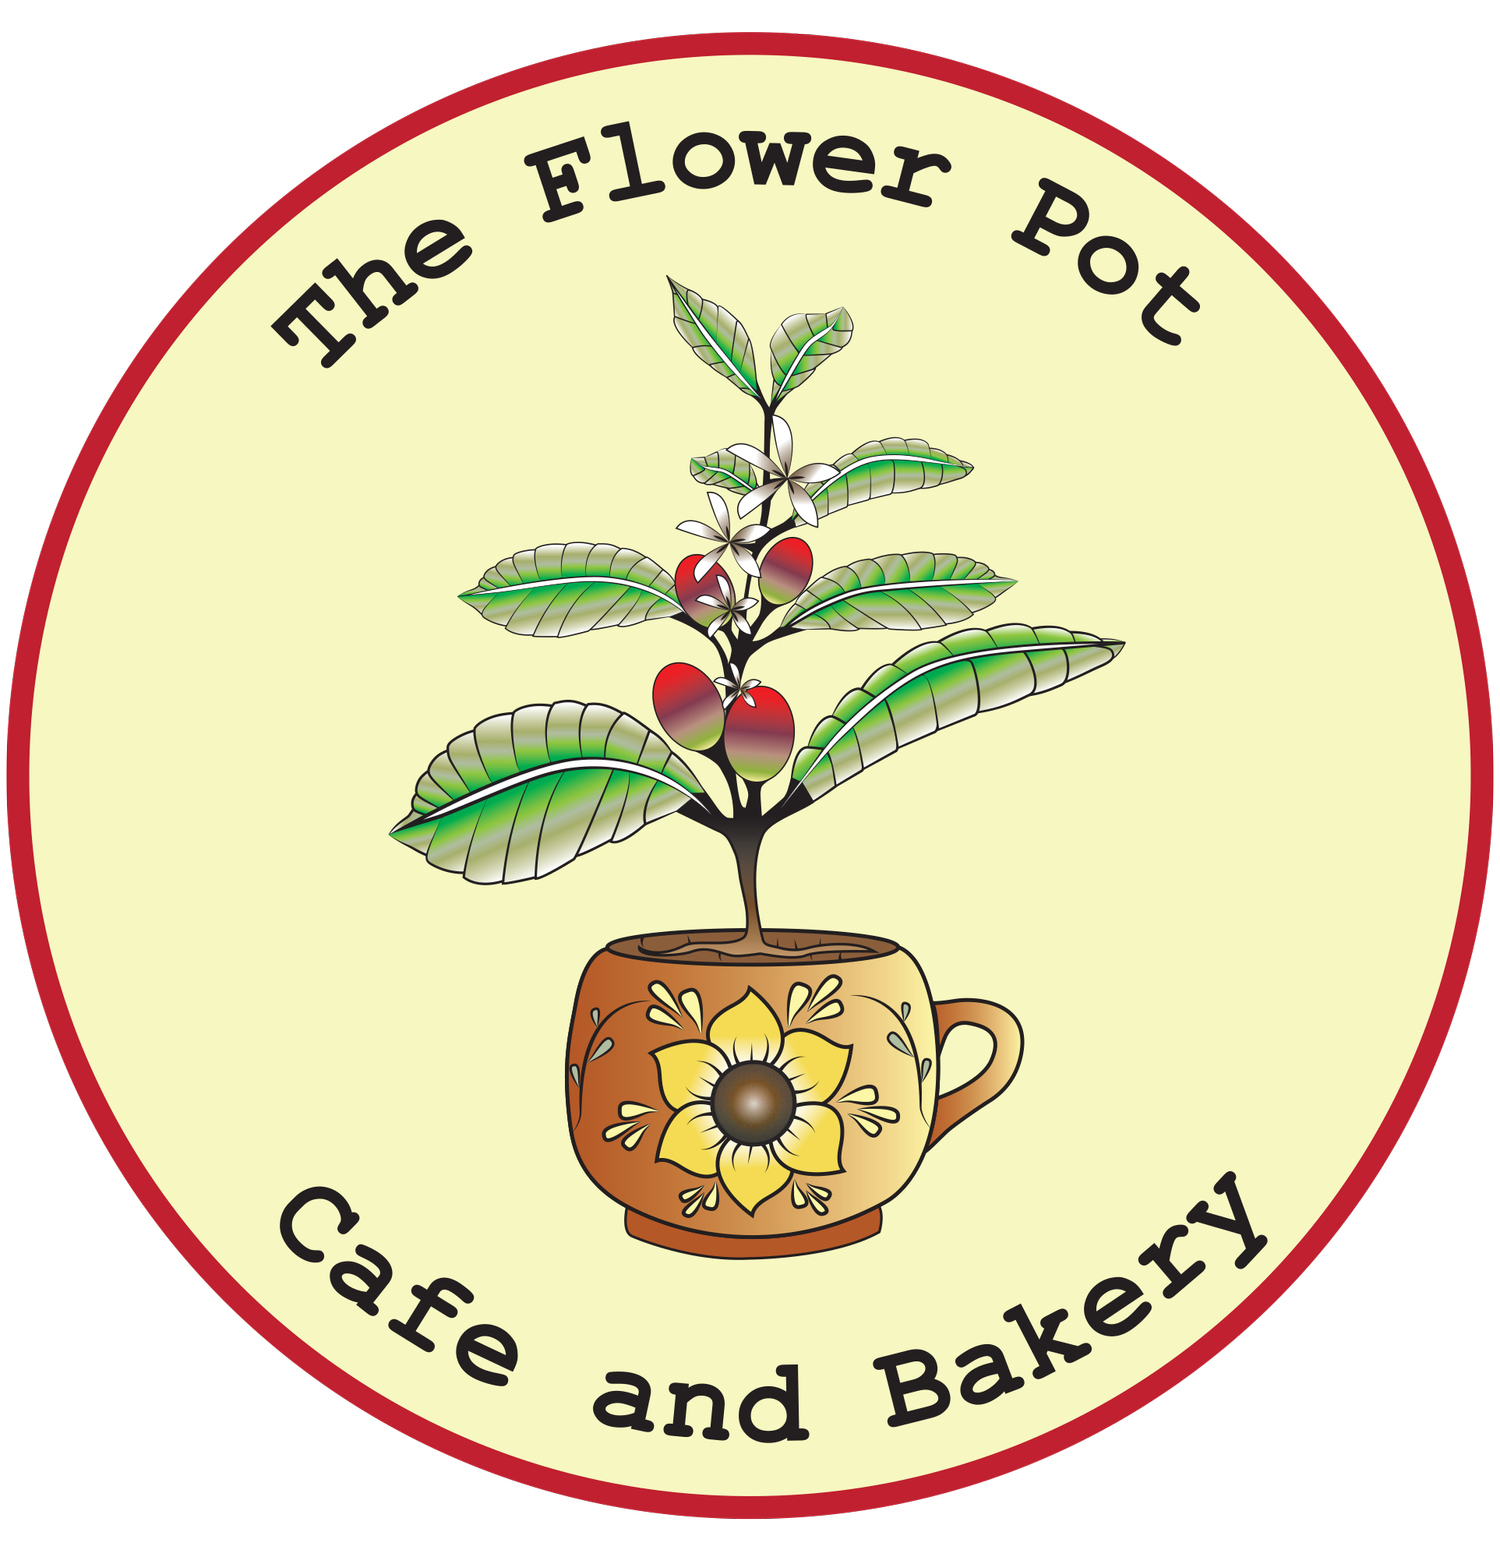 The Flower Pot Cafe and Bakery